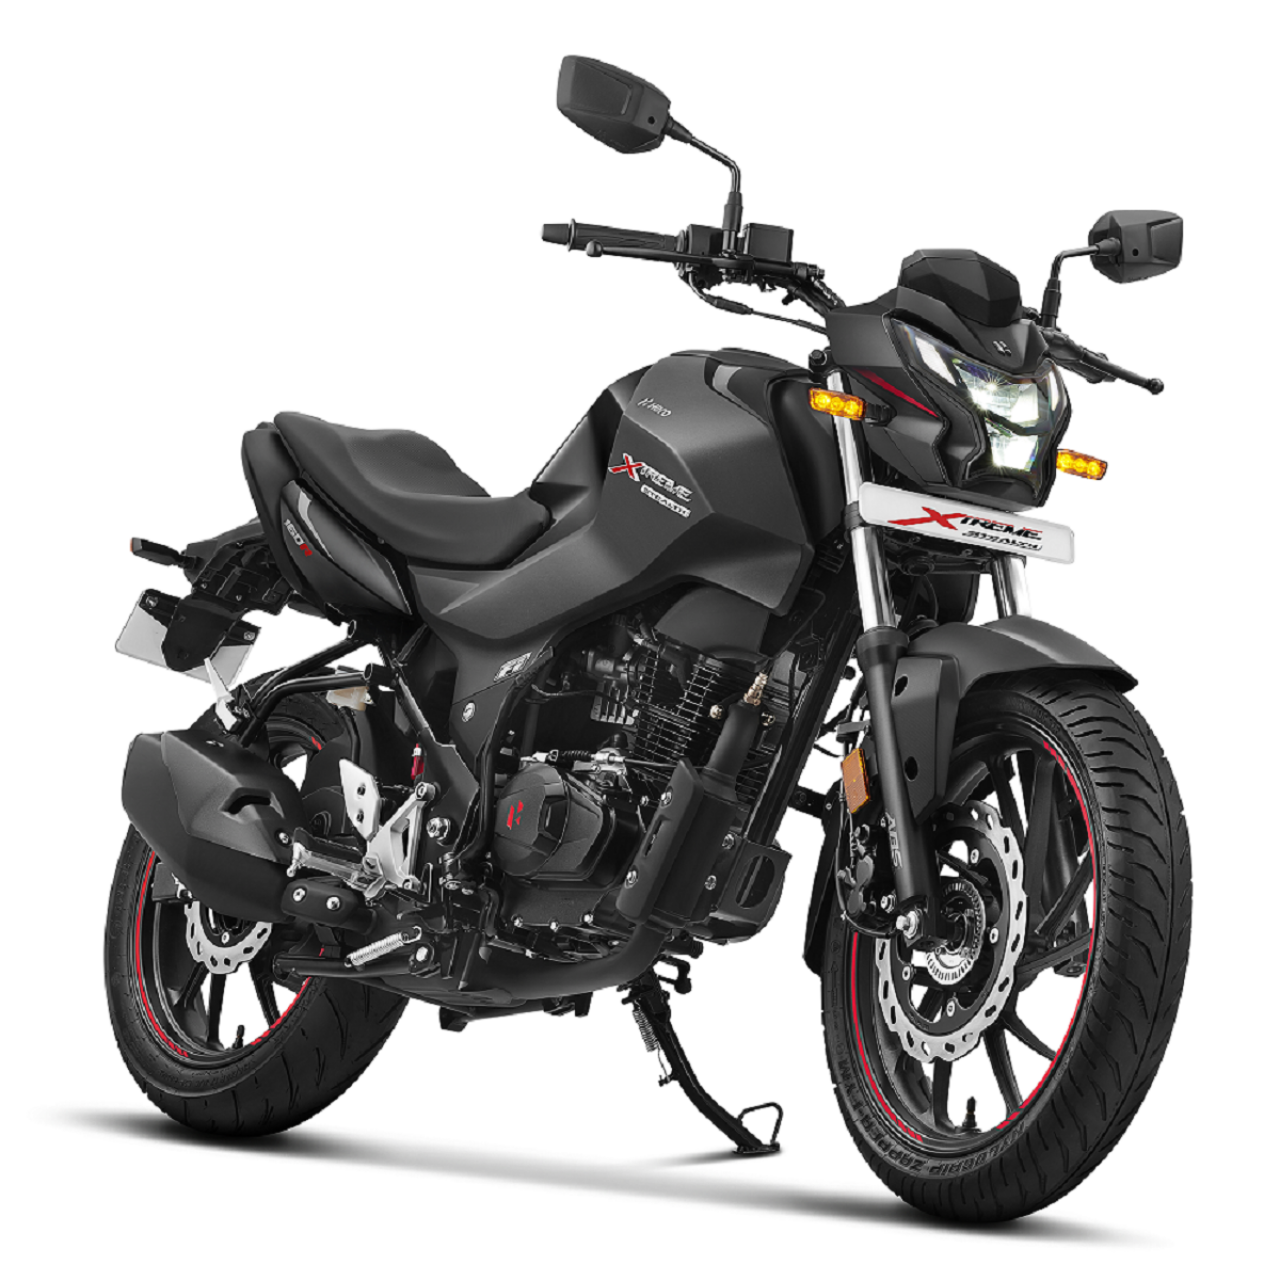 Hero Xtreme 160r Stealth Edition Launched At Rs 1 16 660 Team Bhp